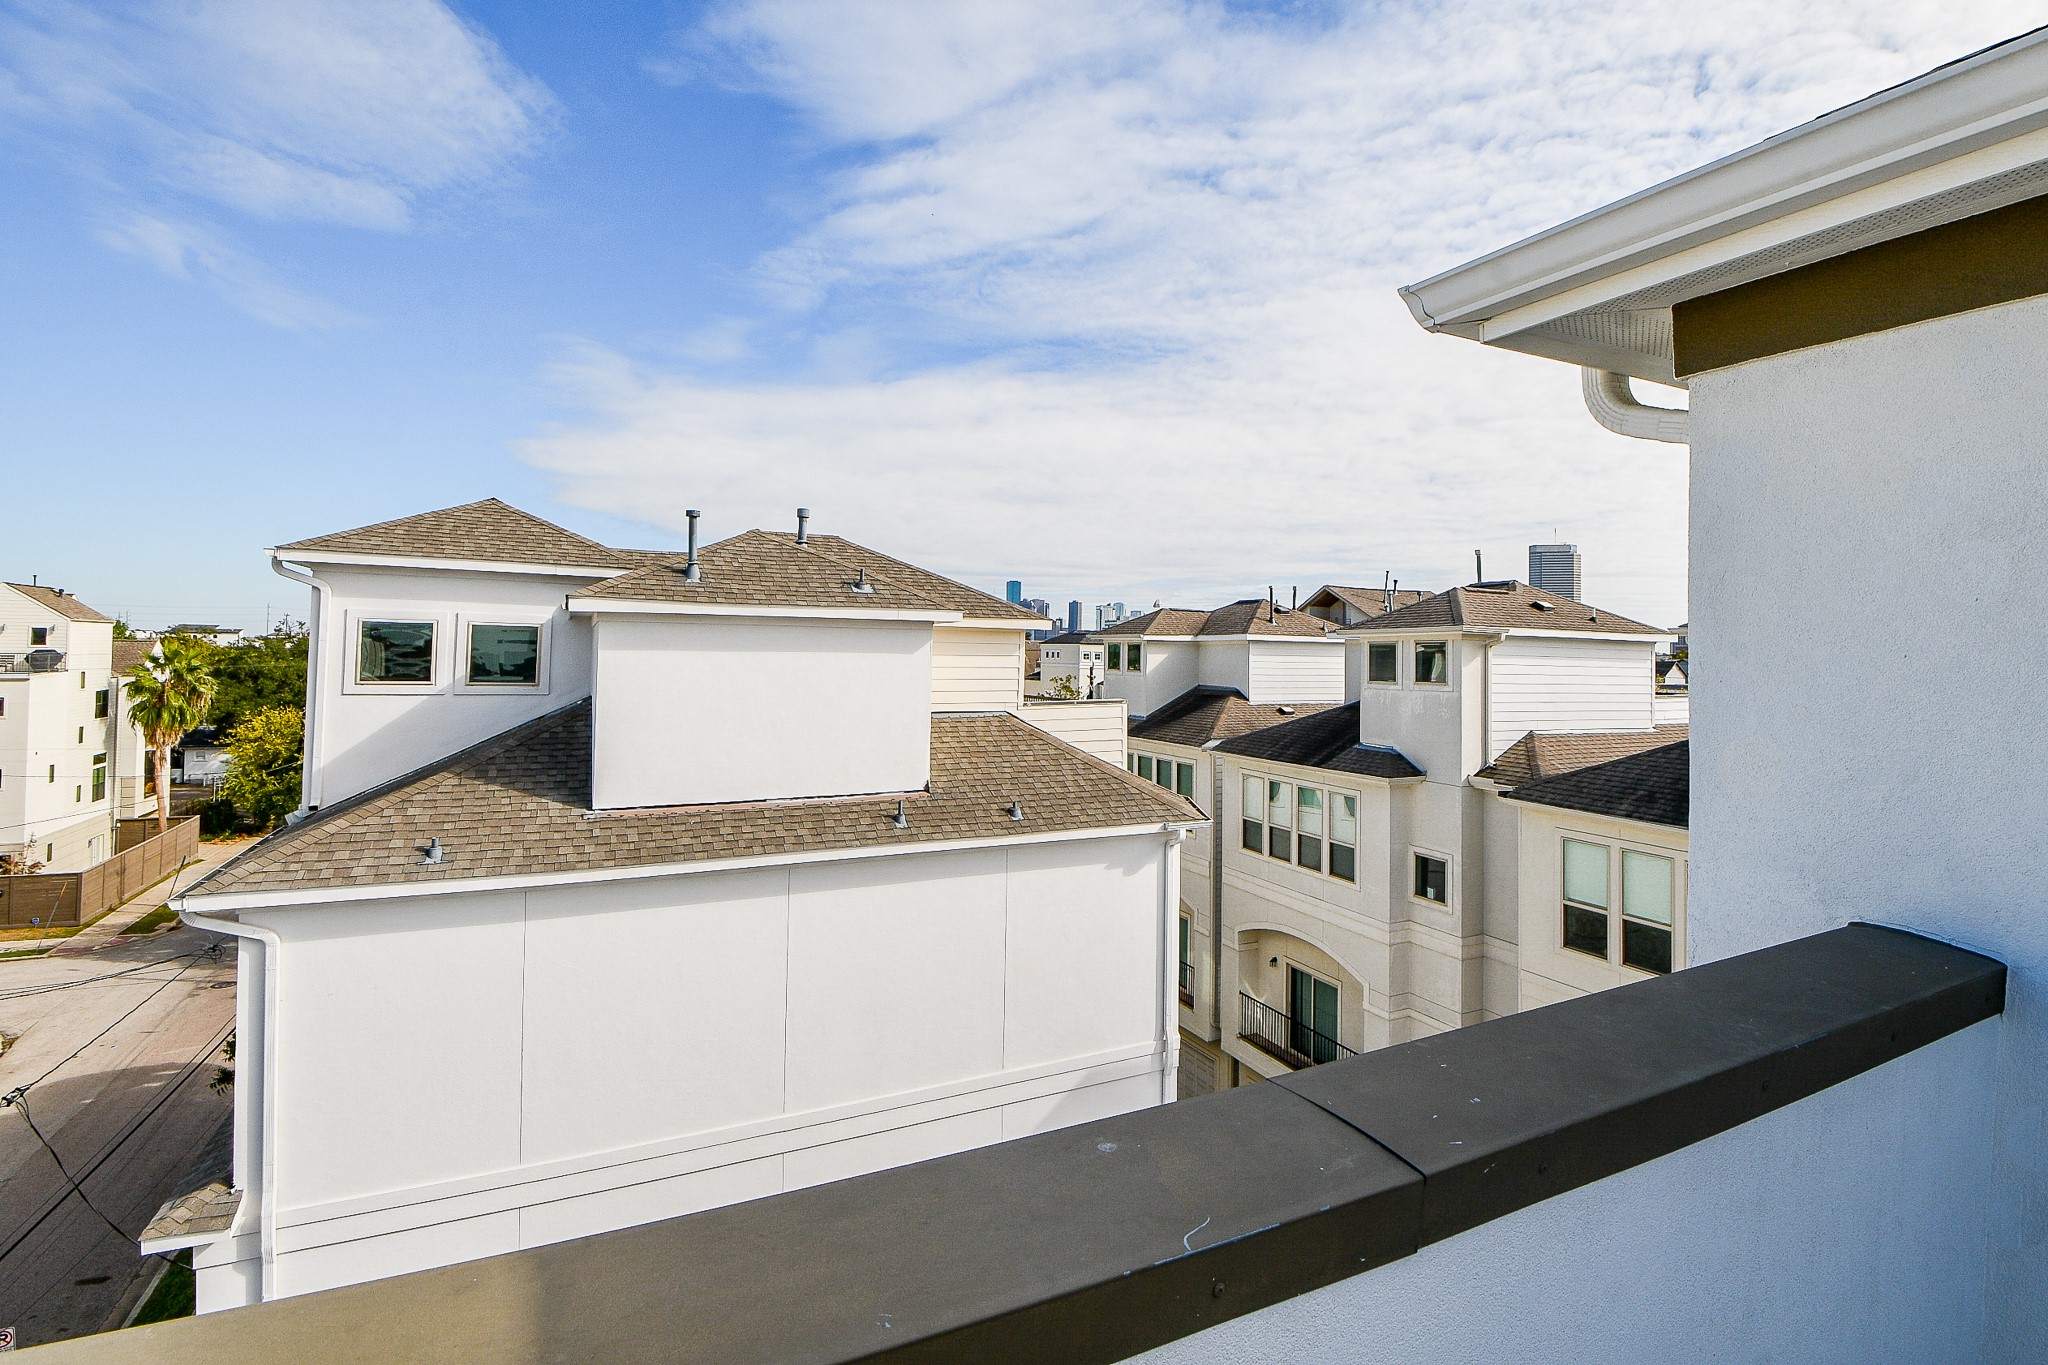 Not every home can boast this incredible roof top feature!